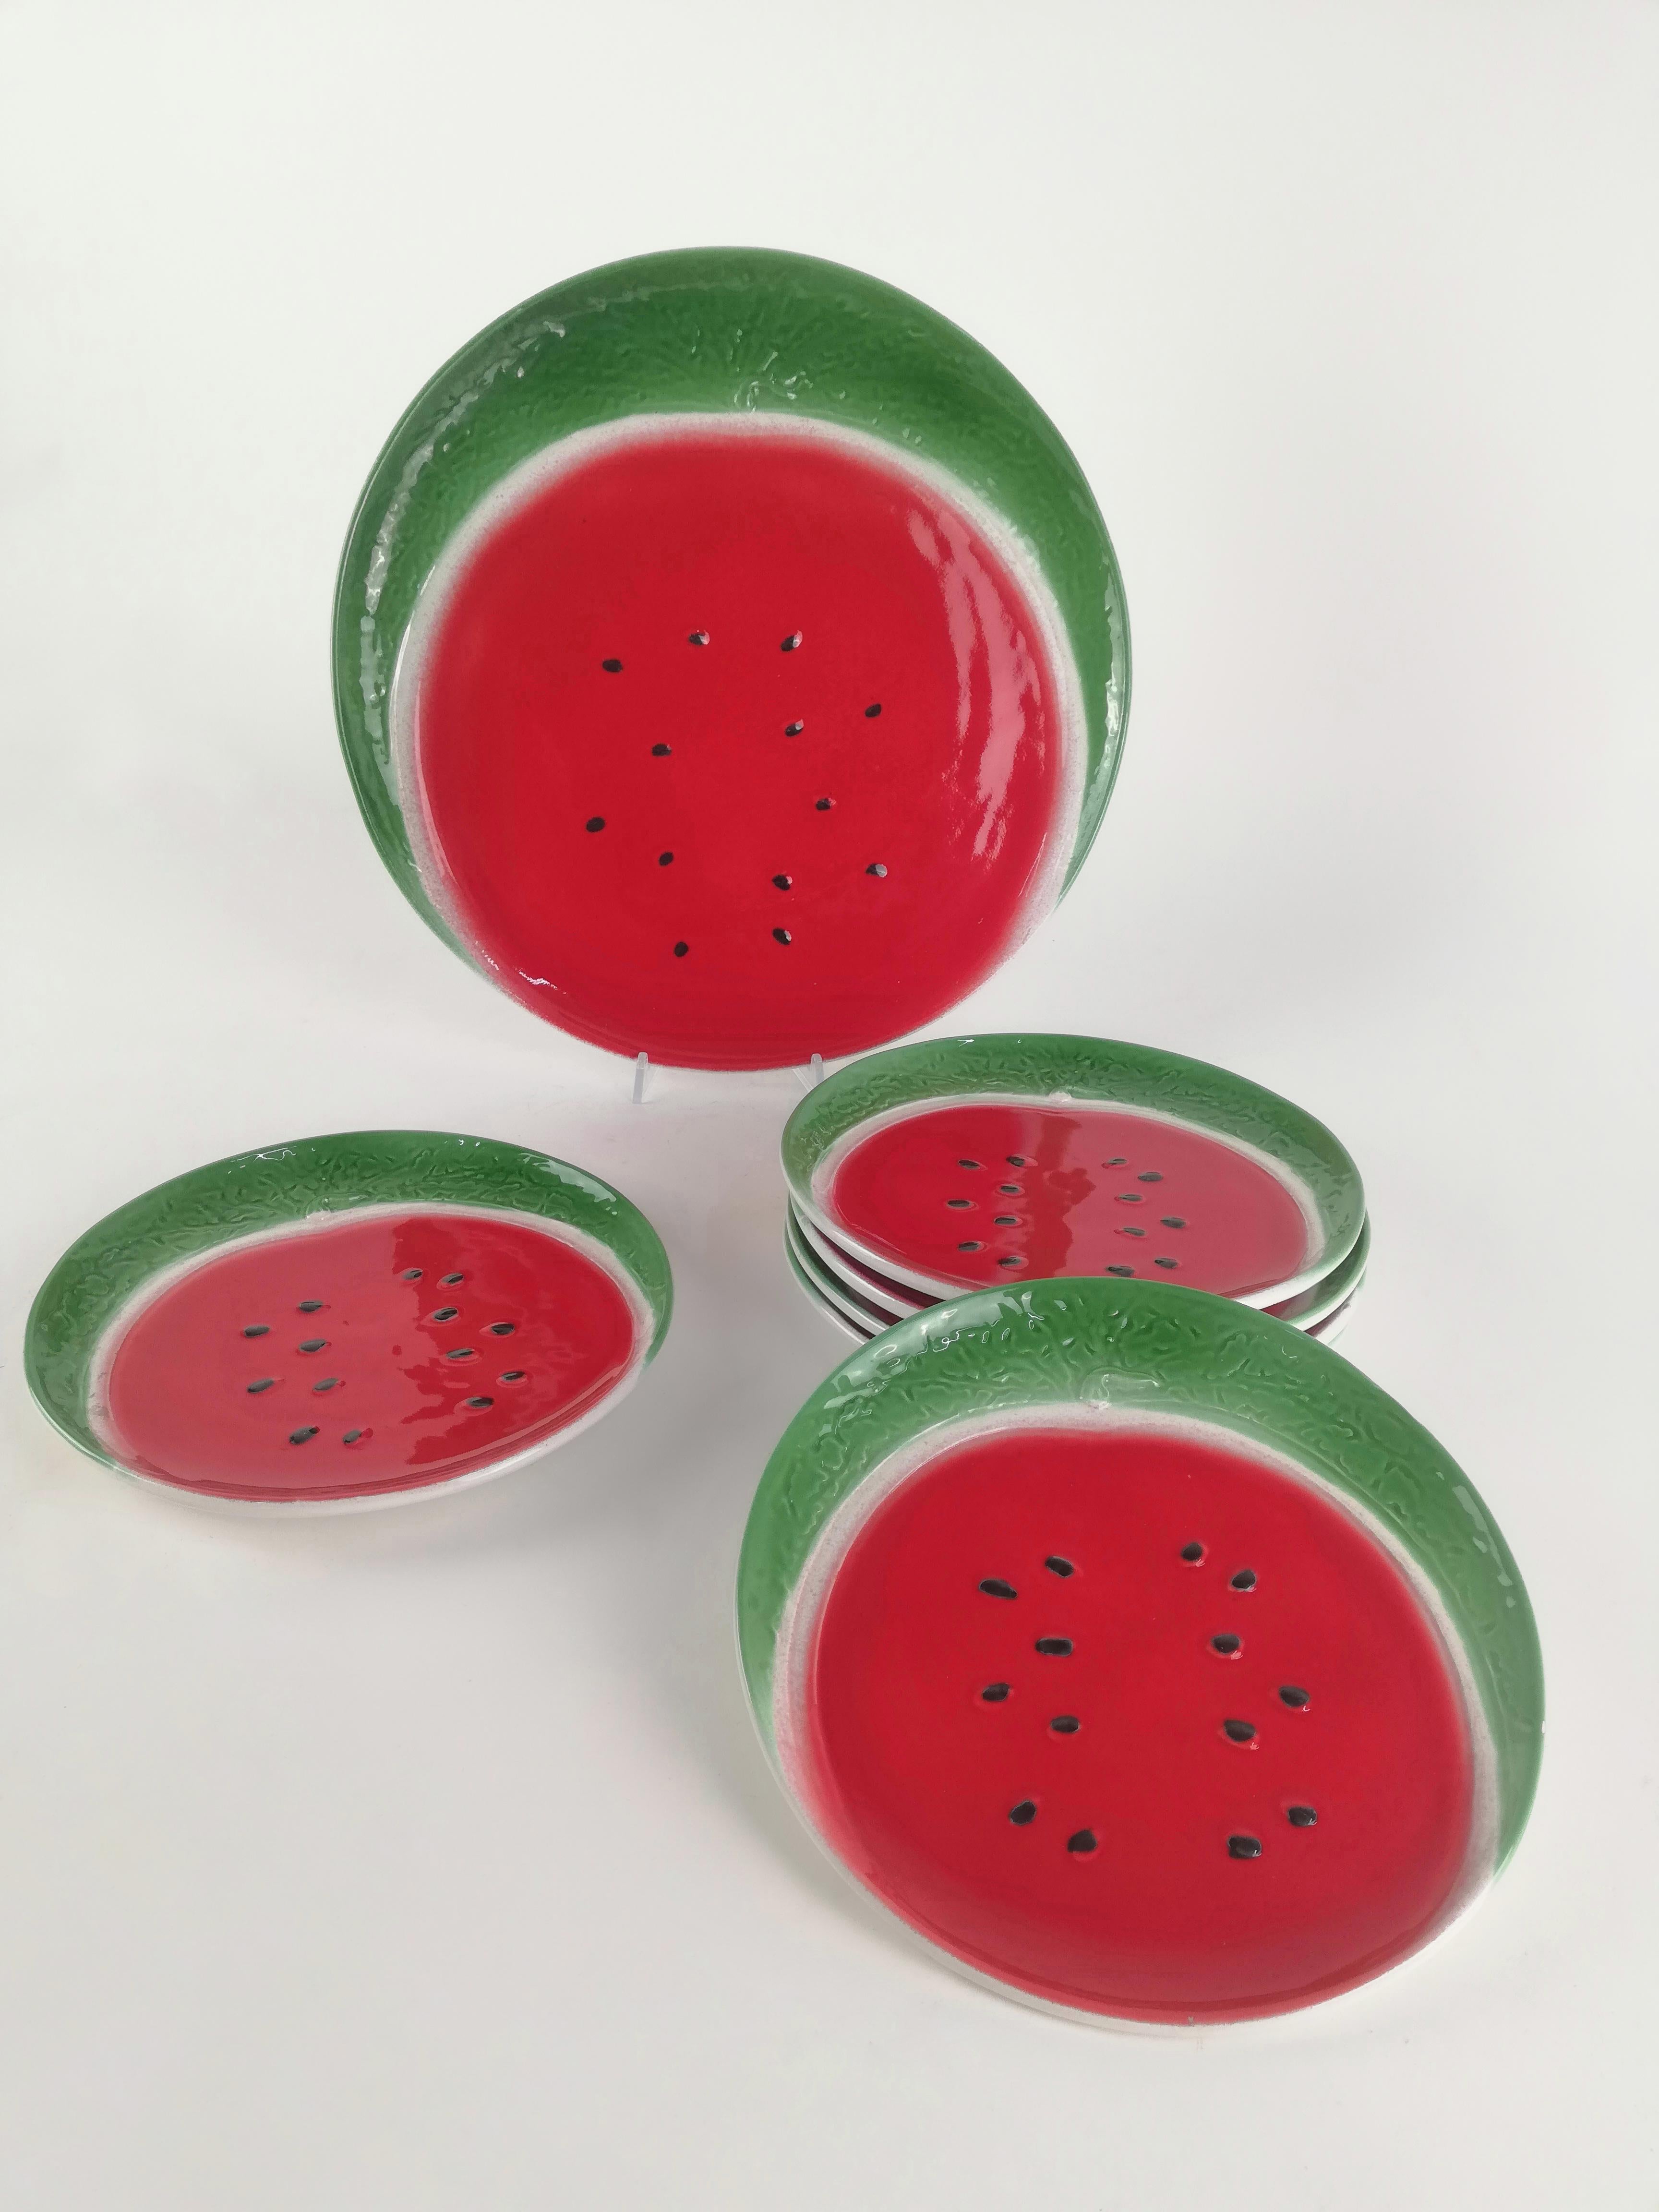 Vintage Handcrafted and Hand Painted Watermelon Plates, Italy, 1970s For Sale 5